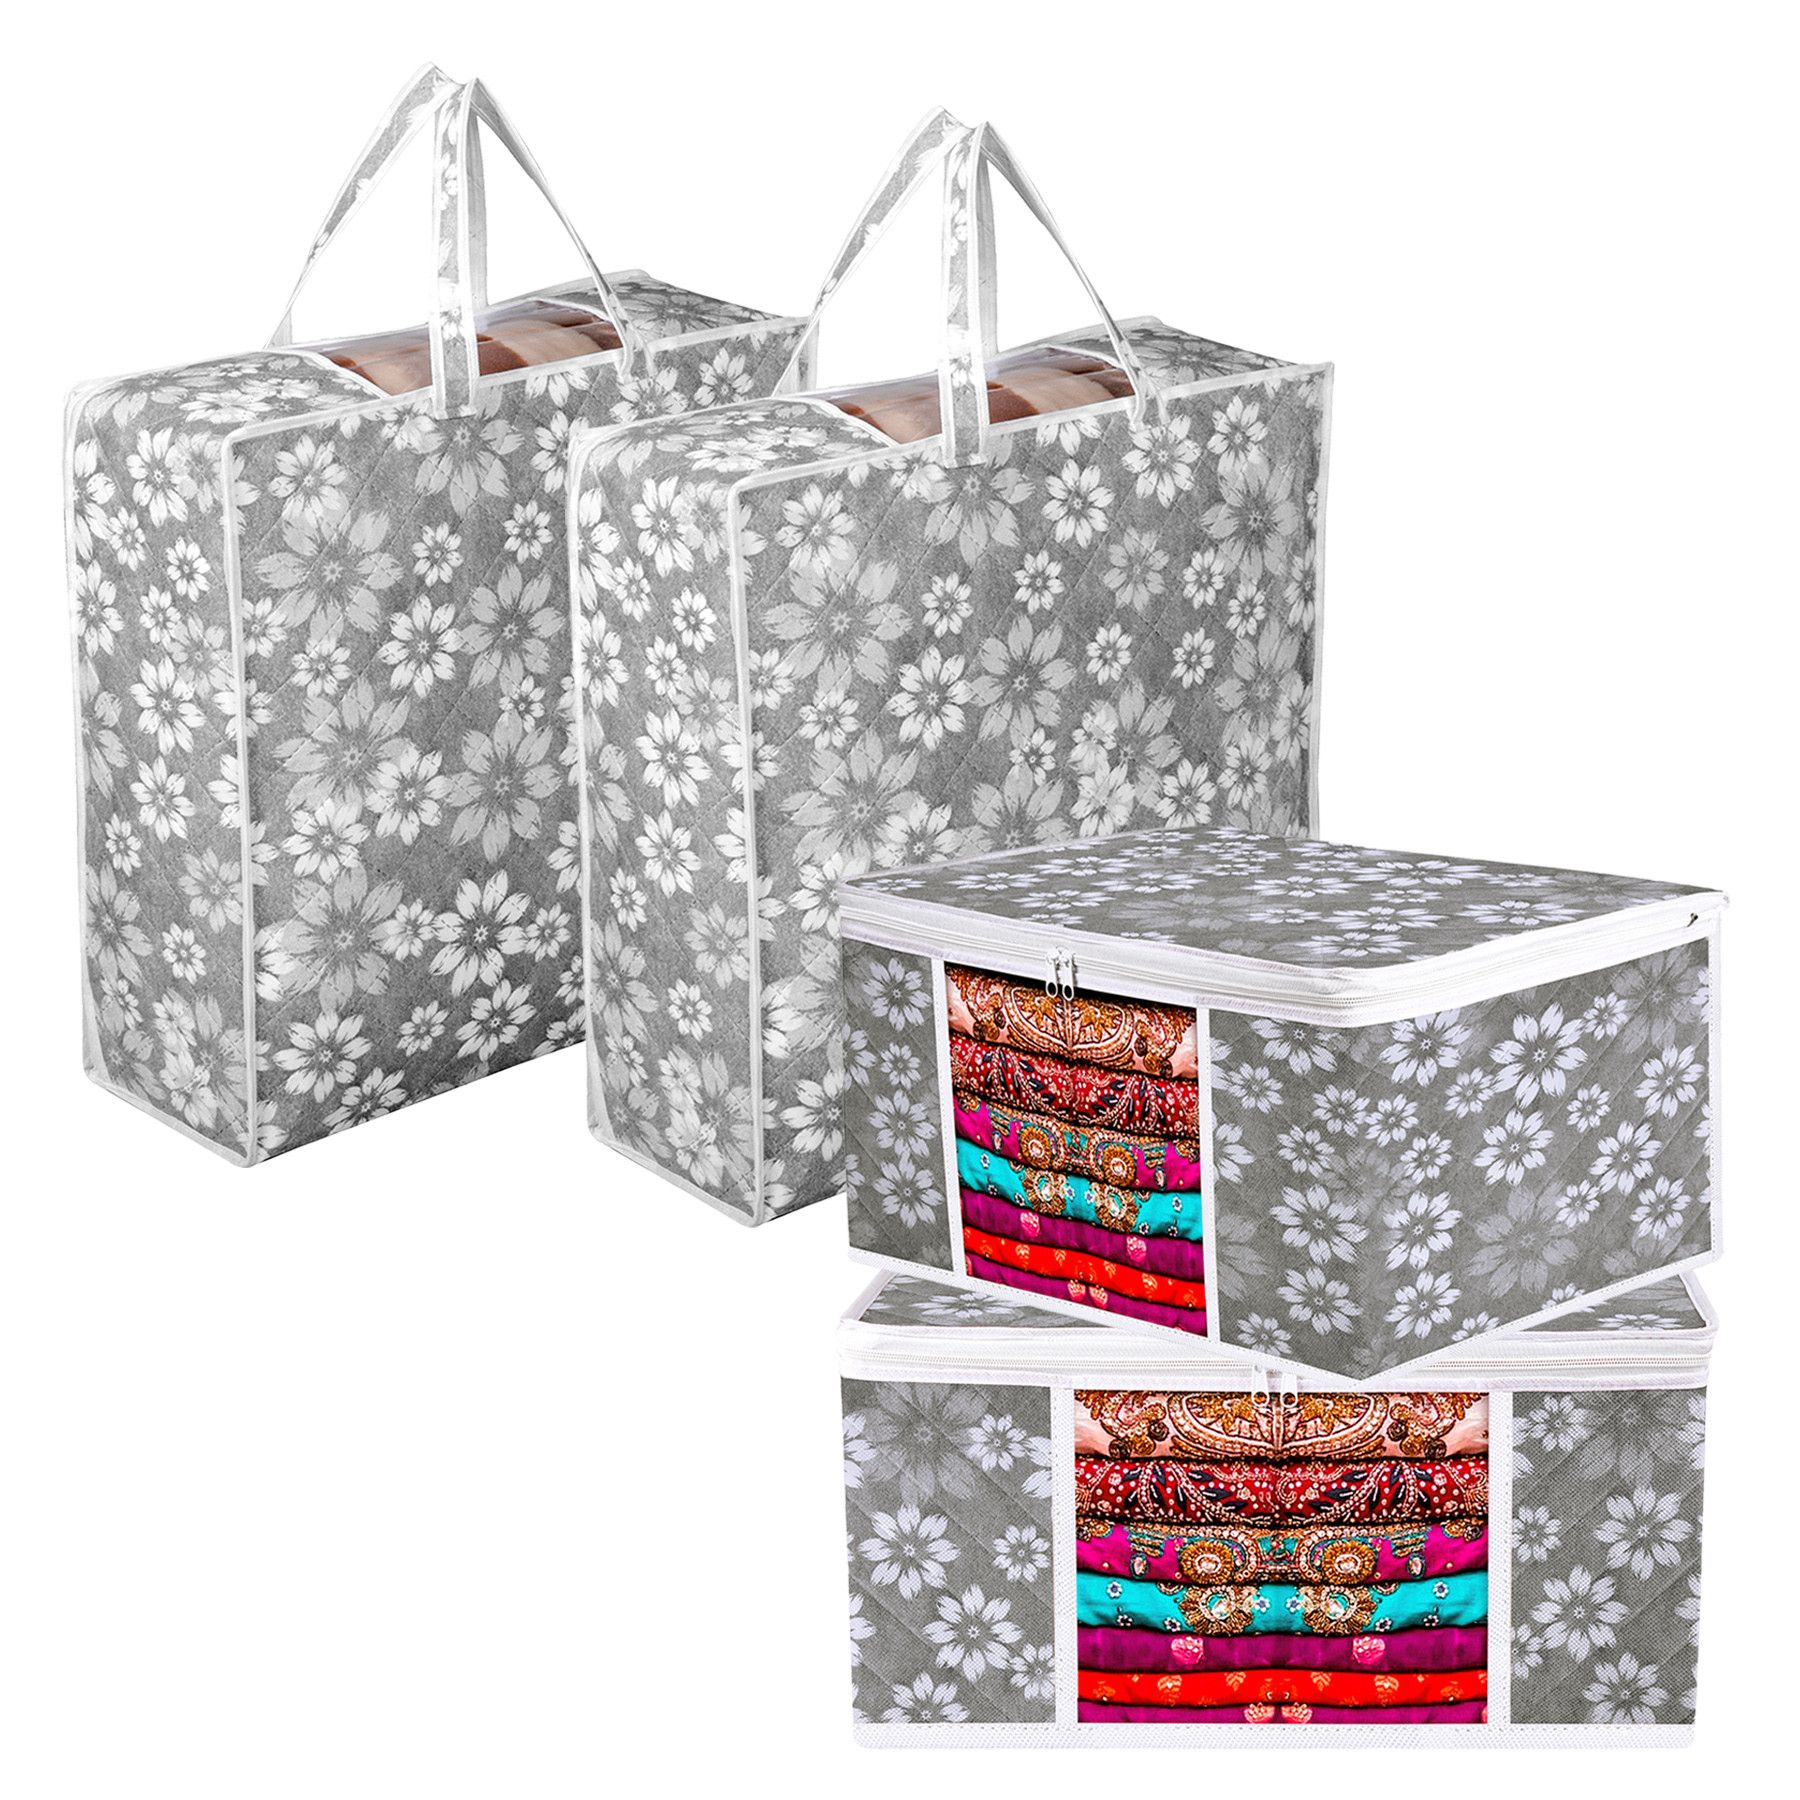 Kuber Industries Saree Cover & Blanket Cover Set |Underbed Storage Bag Combo Set | Visible Window & Handle Storage Bag | Flower Quilted |Gray